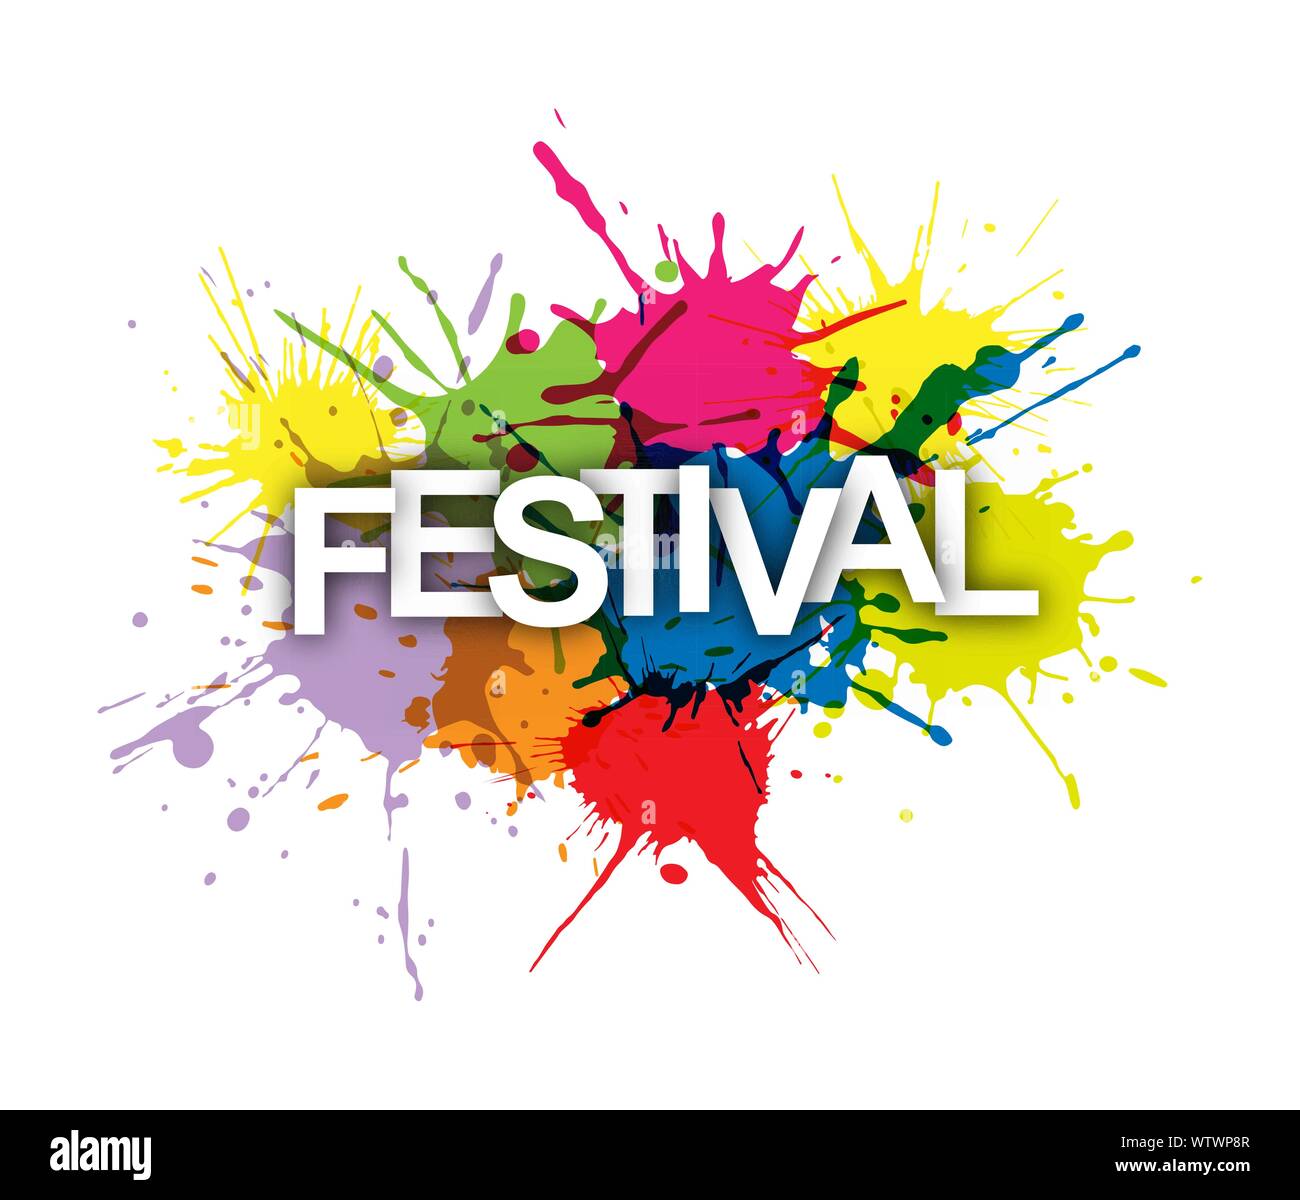 FESTIVAL. Word on a background of colored paint splashes. Stock Vector